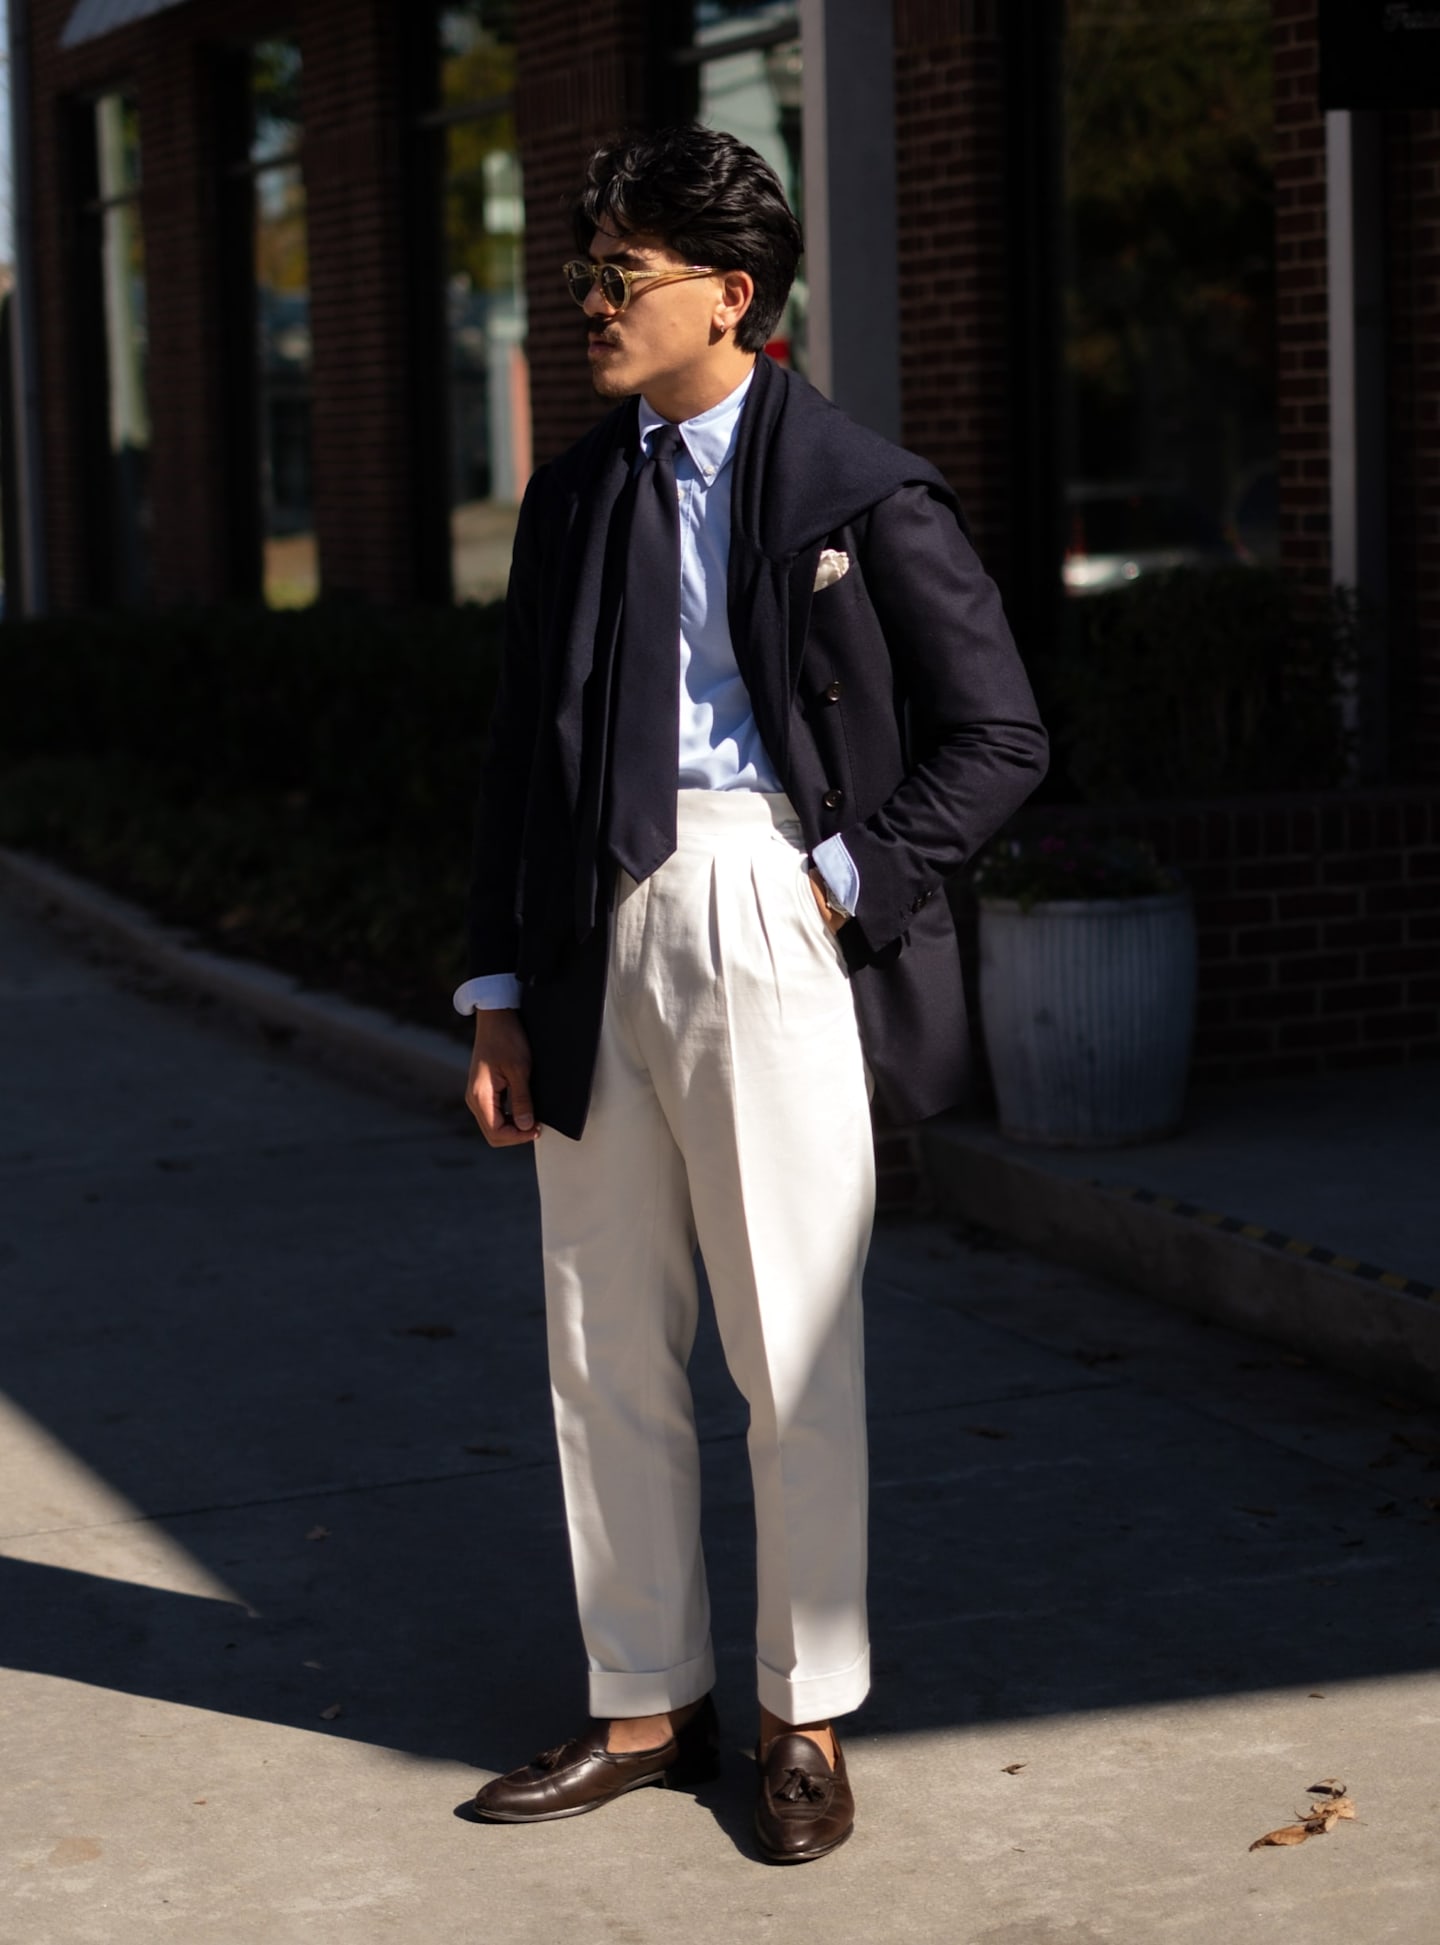 Double-pleated light brown trousers paired with navy blazer, light blue shirt, and navy tie.